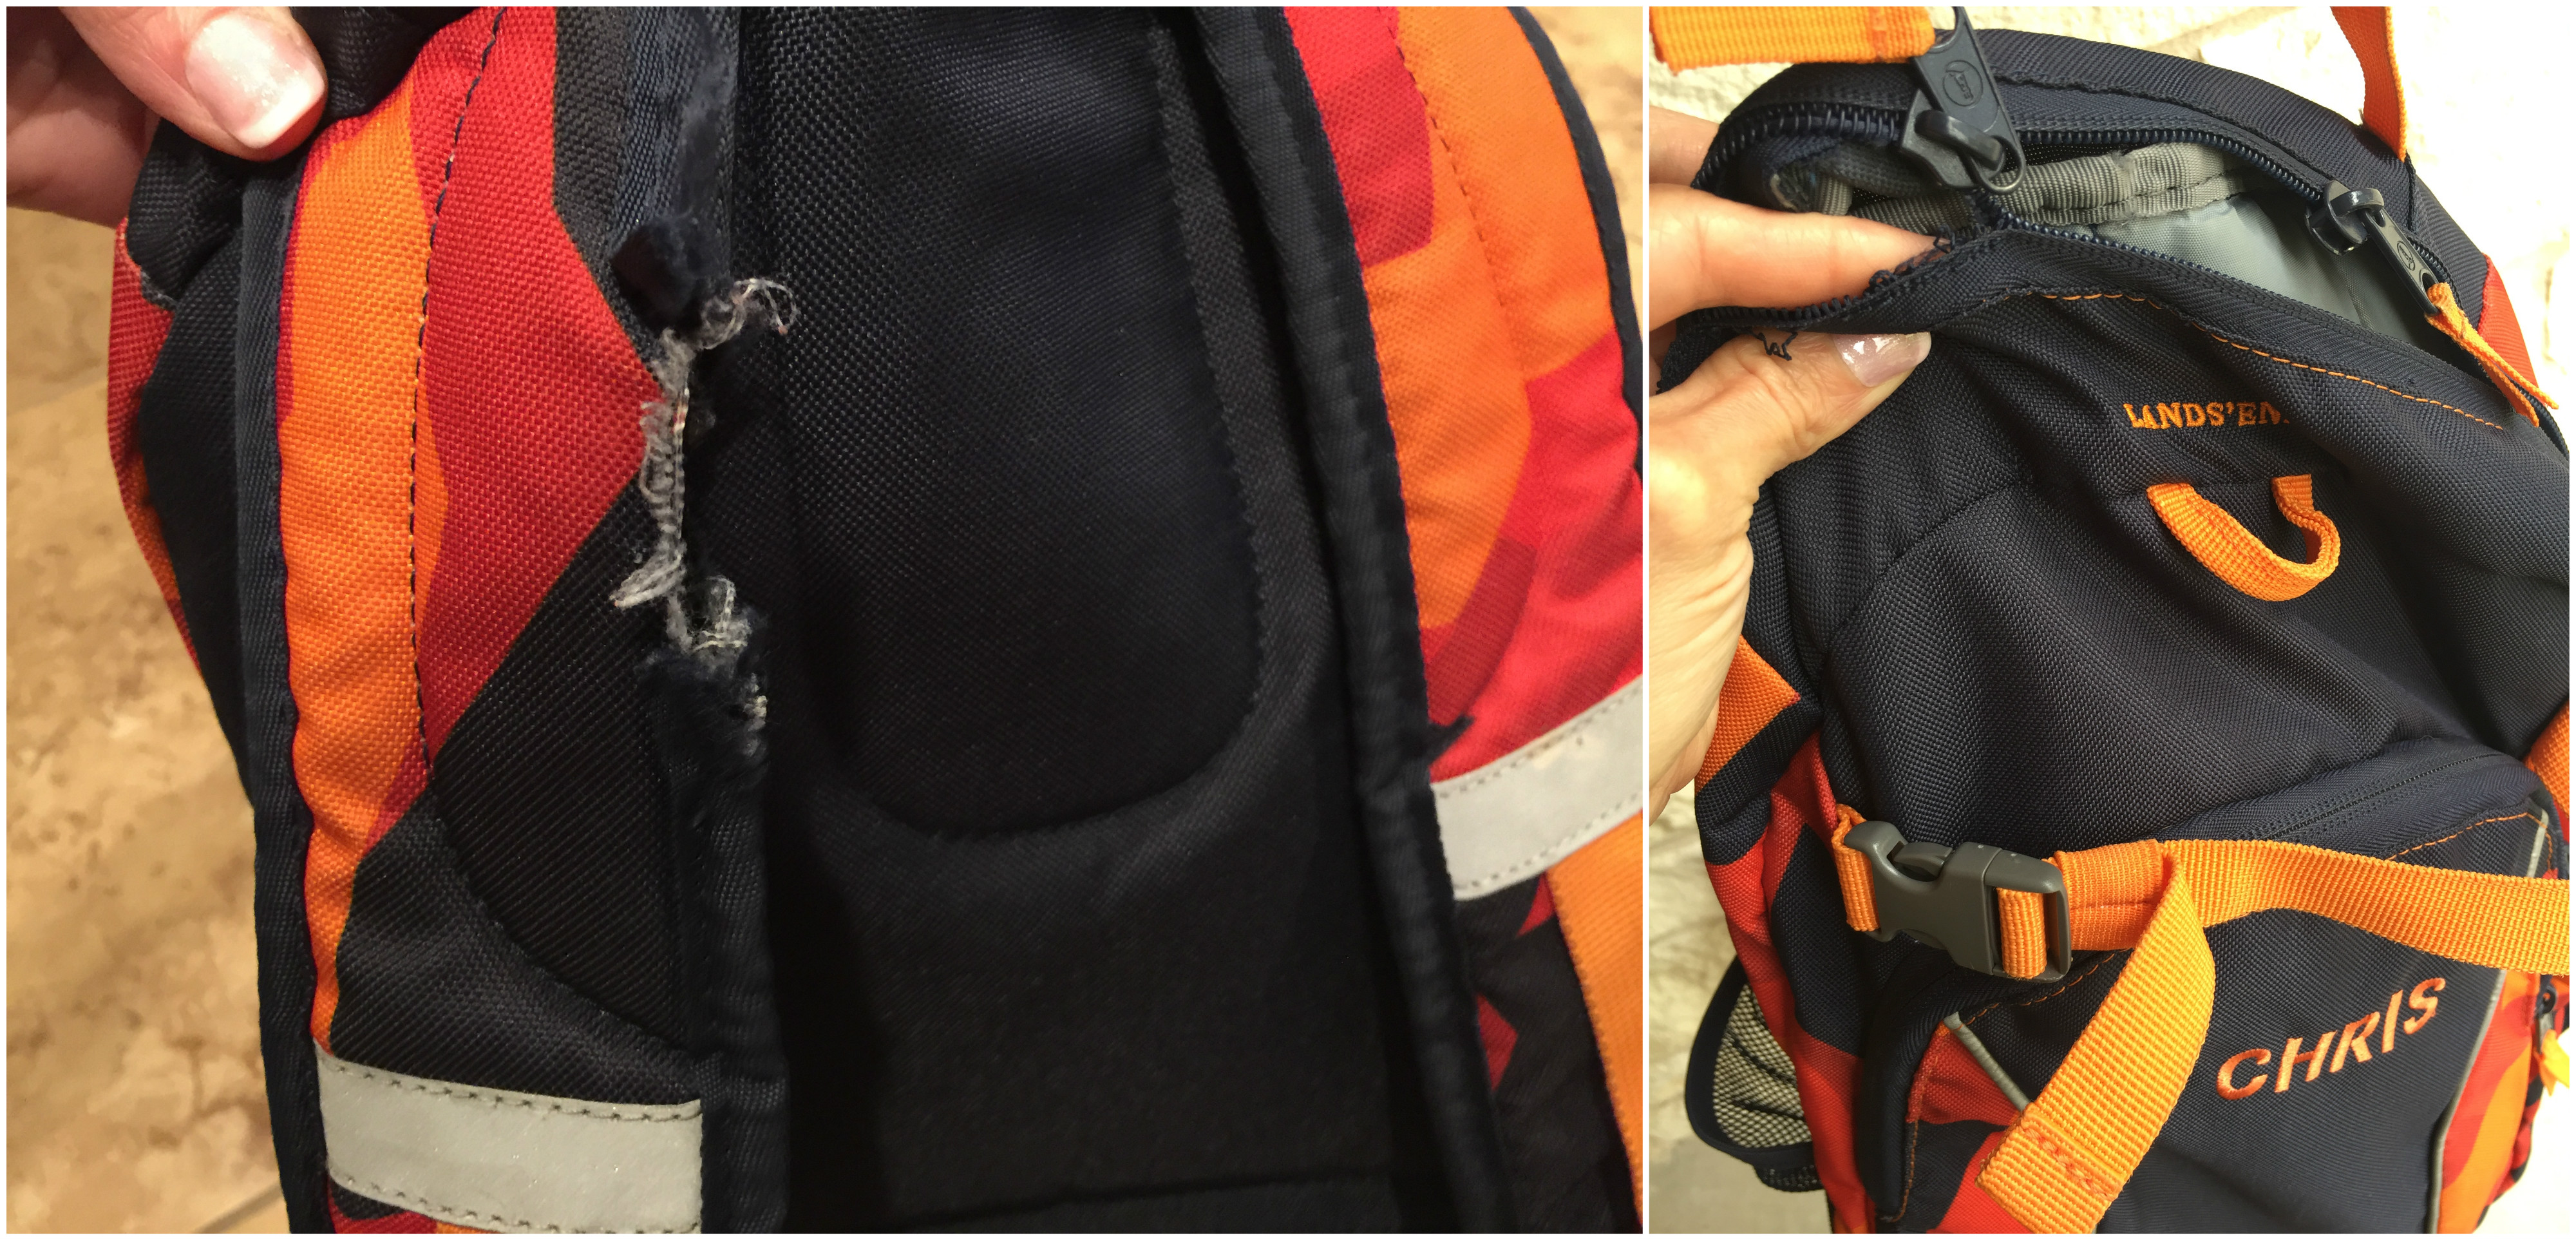 Have Broken Lands' End Backpacks or Lunch Boxes? Don't Throw Them Away! - Hip2Save